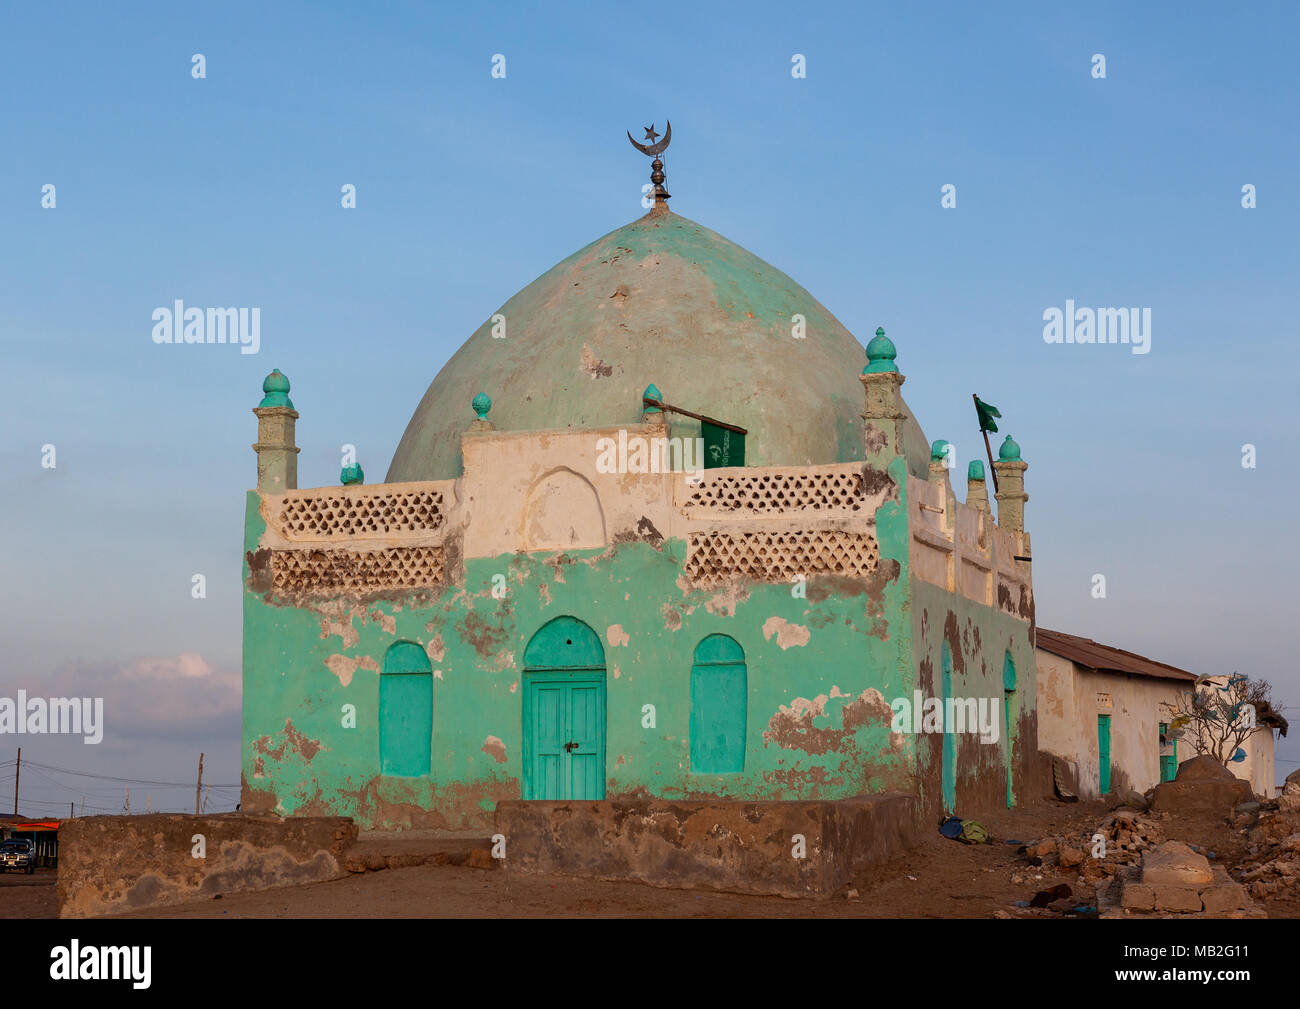 Old muslim grave with painted walls, Awdal region, Zeila, Somaliland Stock Photo